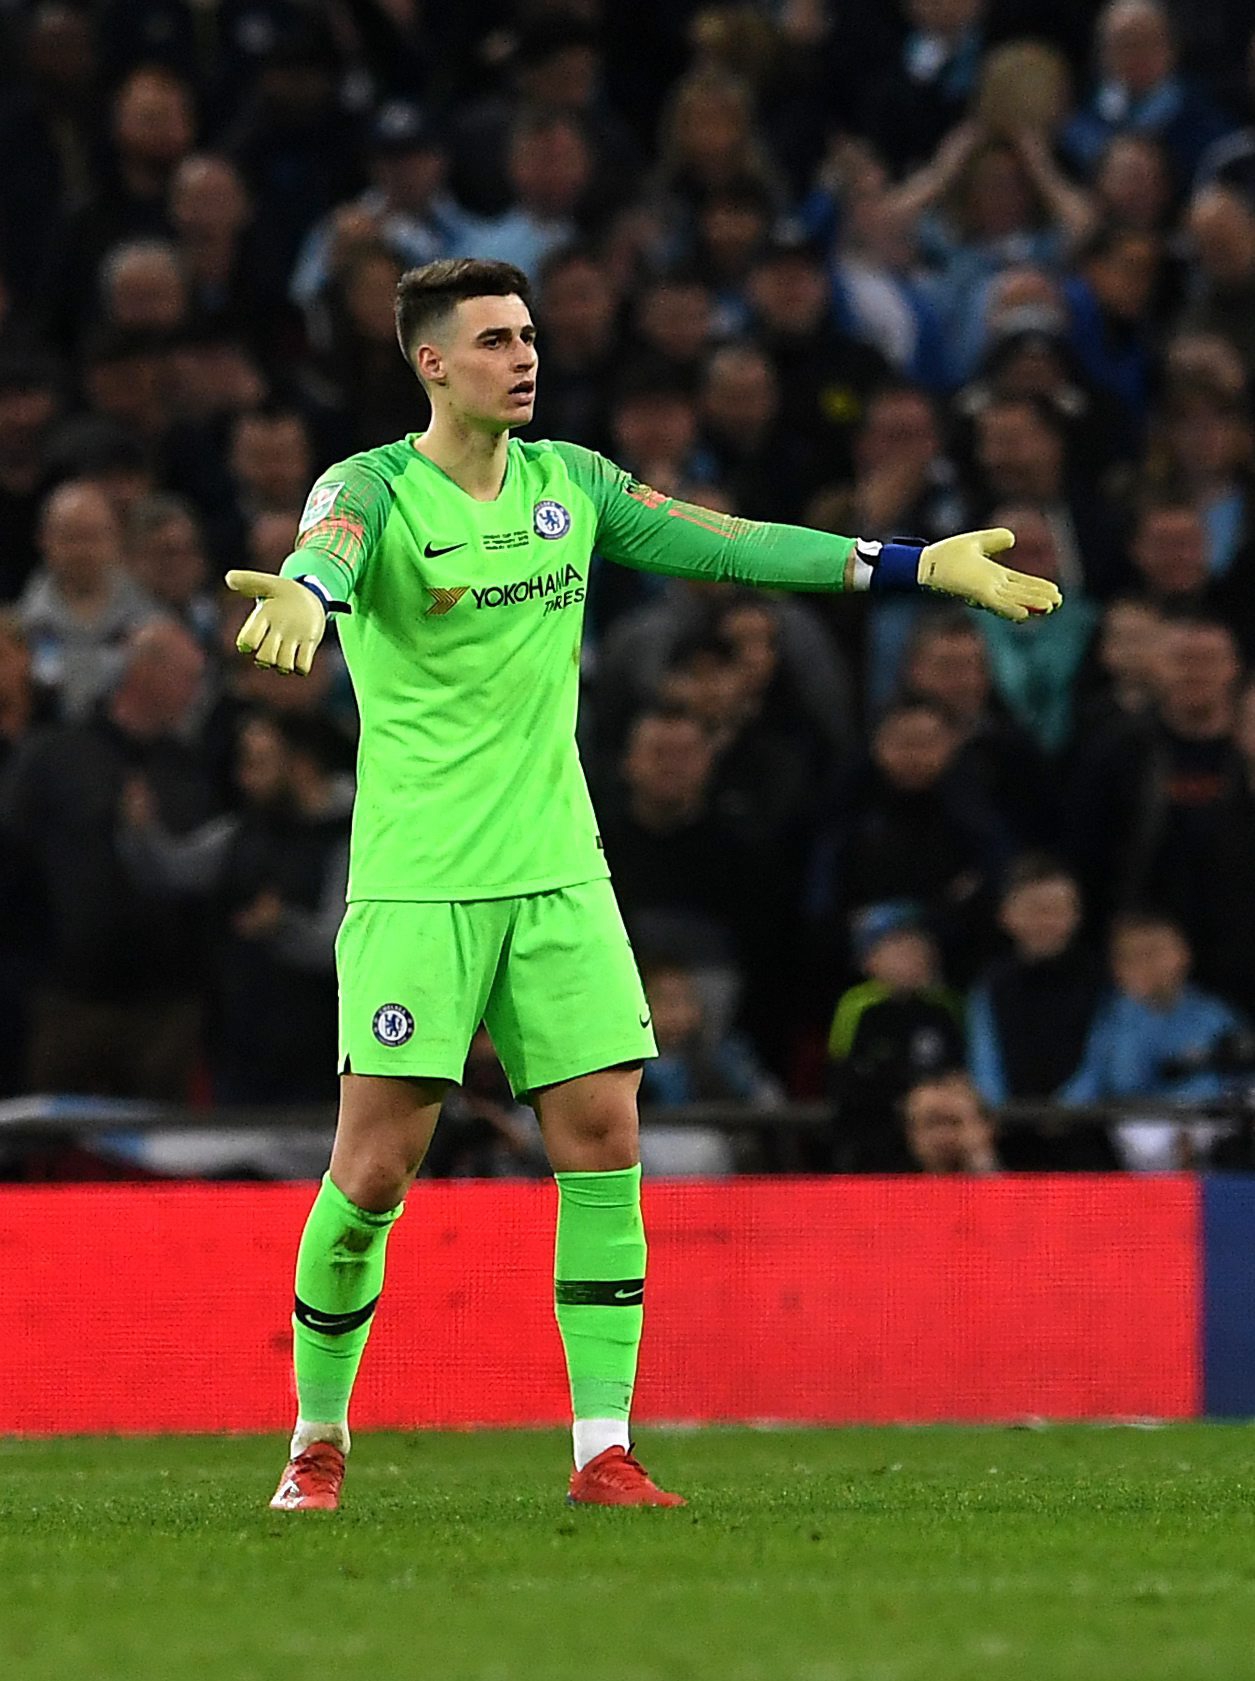 epa07393757 Chelsea's goalkeeper Kepa Arrizabalaga reacts as he should be substituted during half time of extra time of the English League Cup final between Chelsea FC and Manchester City at Wembley stadium in London, Britain, 24 February 2019.  EPA/NEIL HALL EDITORIAL USE ONLY. No use with unauthorized audio, video, data, fixture lists, club/league logos or 'live' services. Online in-match use limited to 120 images, no video emulation. No use in betting, games or single club/league/player publications BRITAIN SOCCER ENGLISH LEAGUE CUP